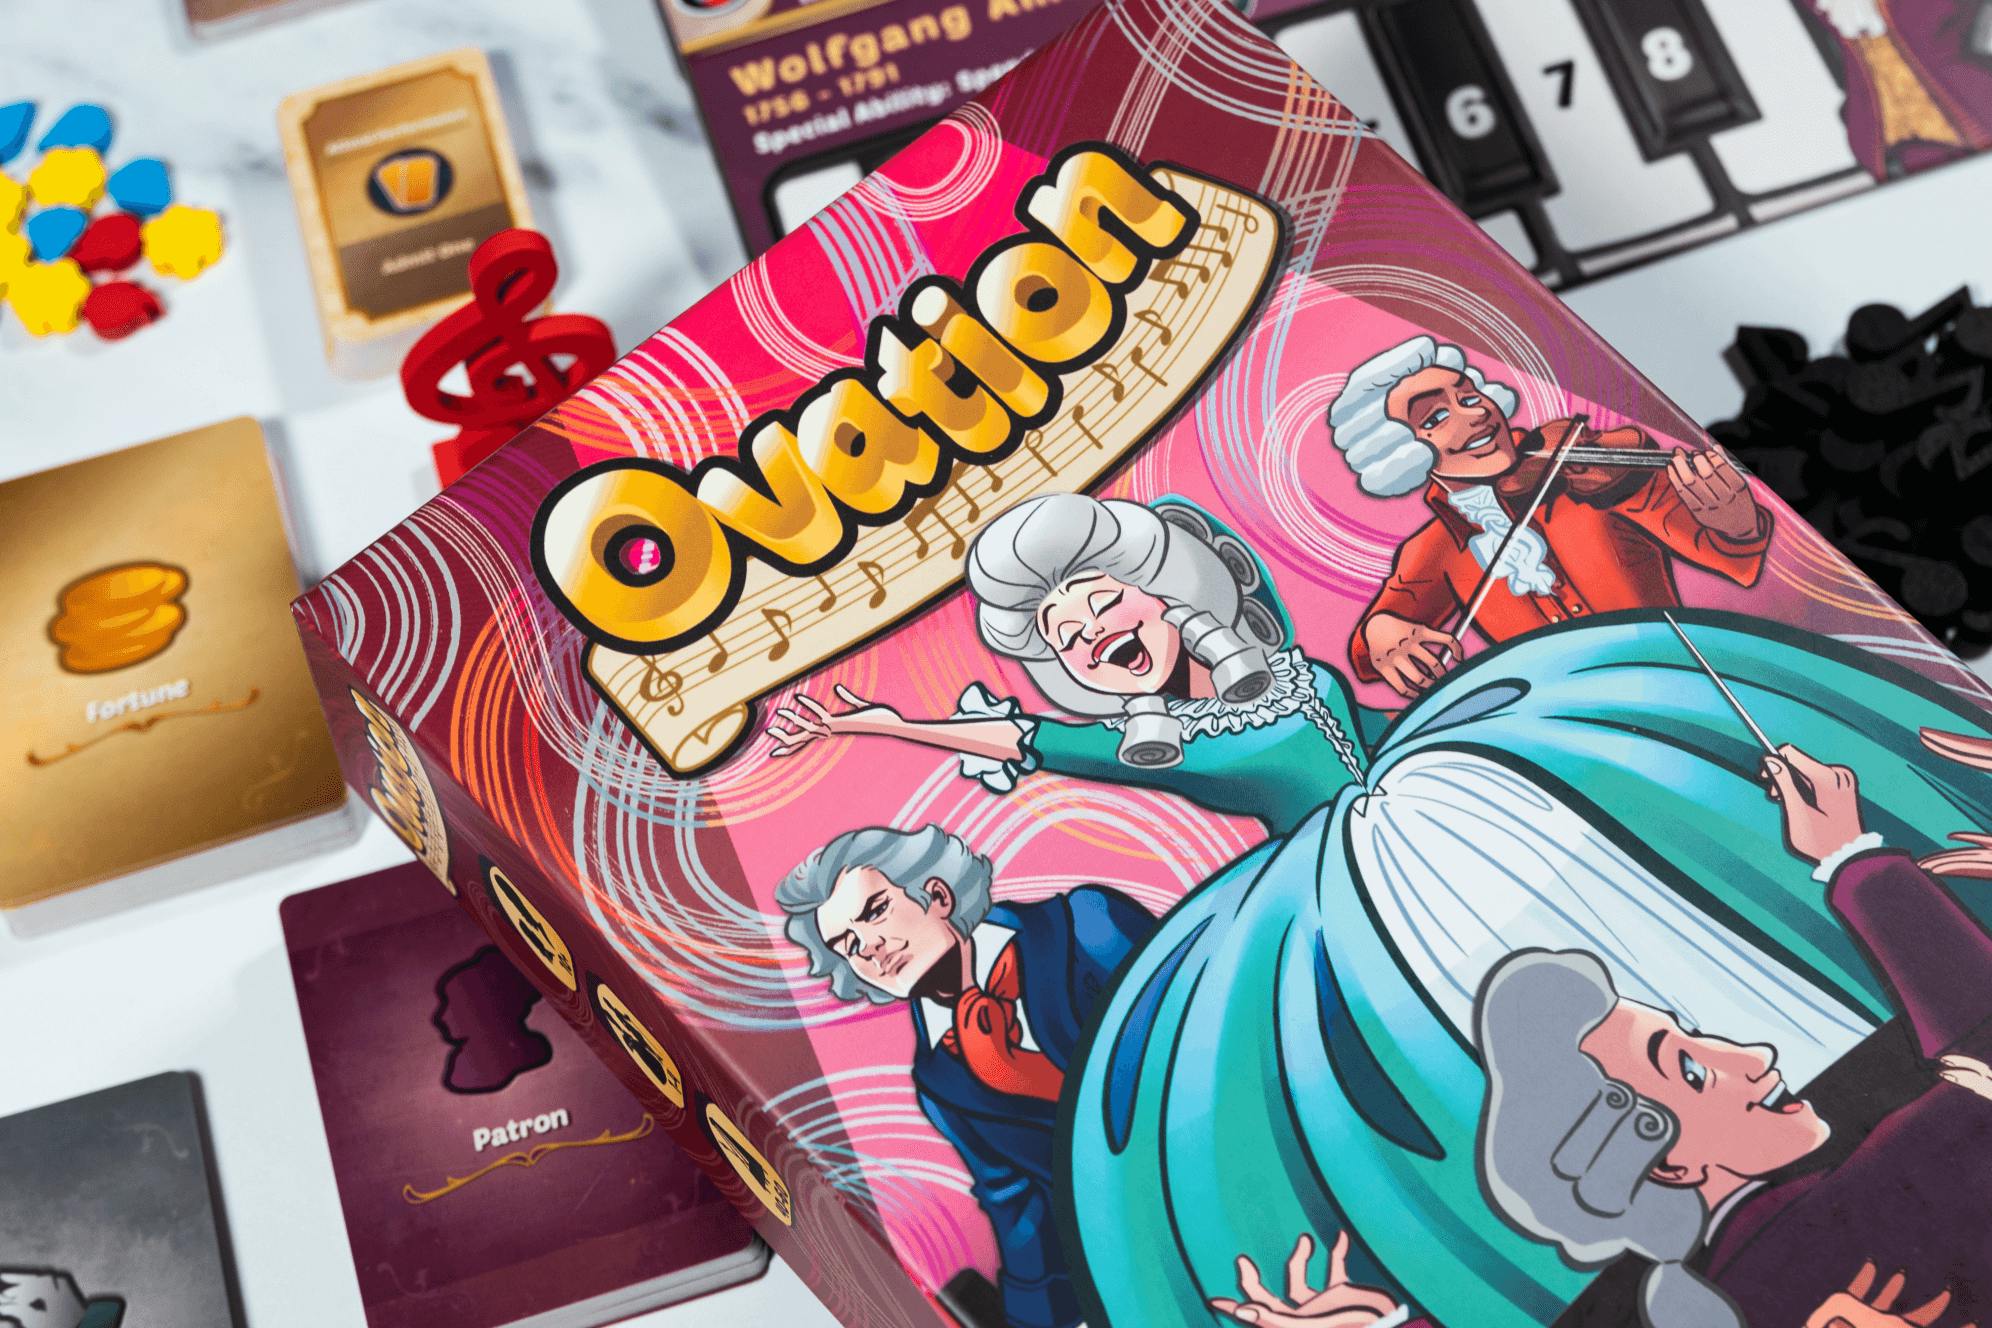 Ovation (image shows the game box)